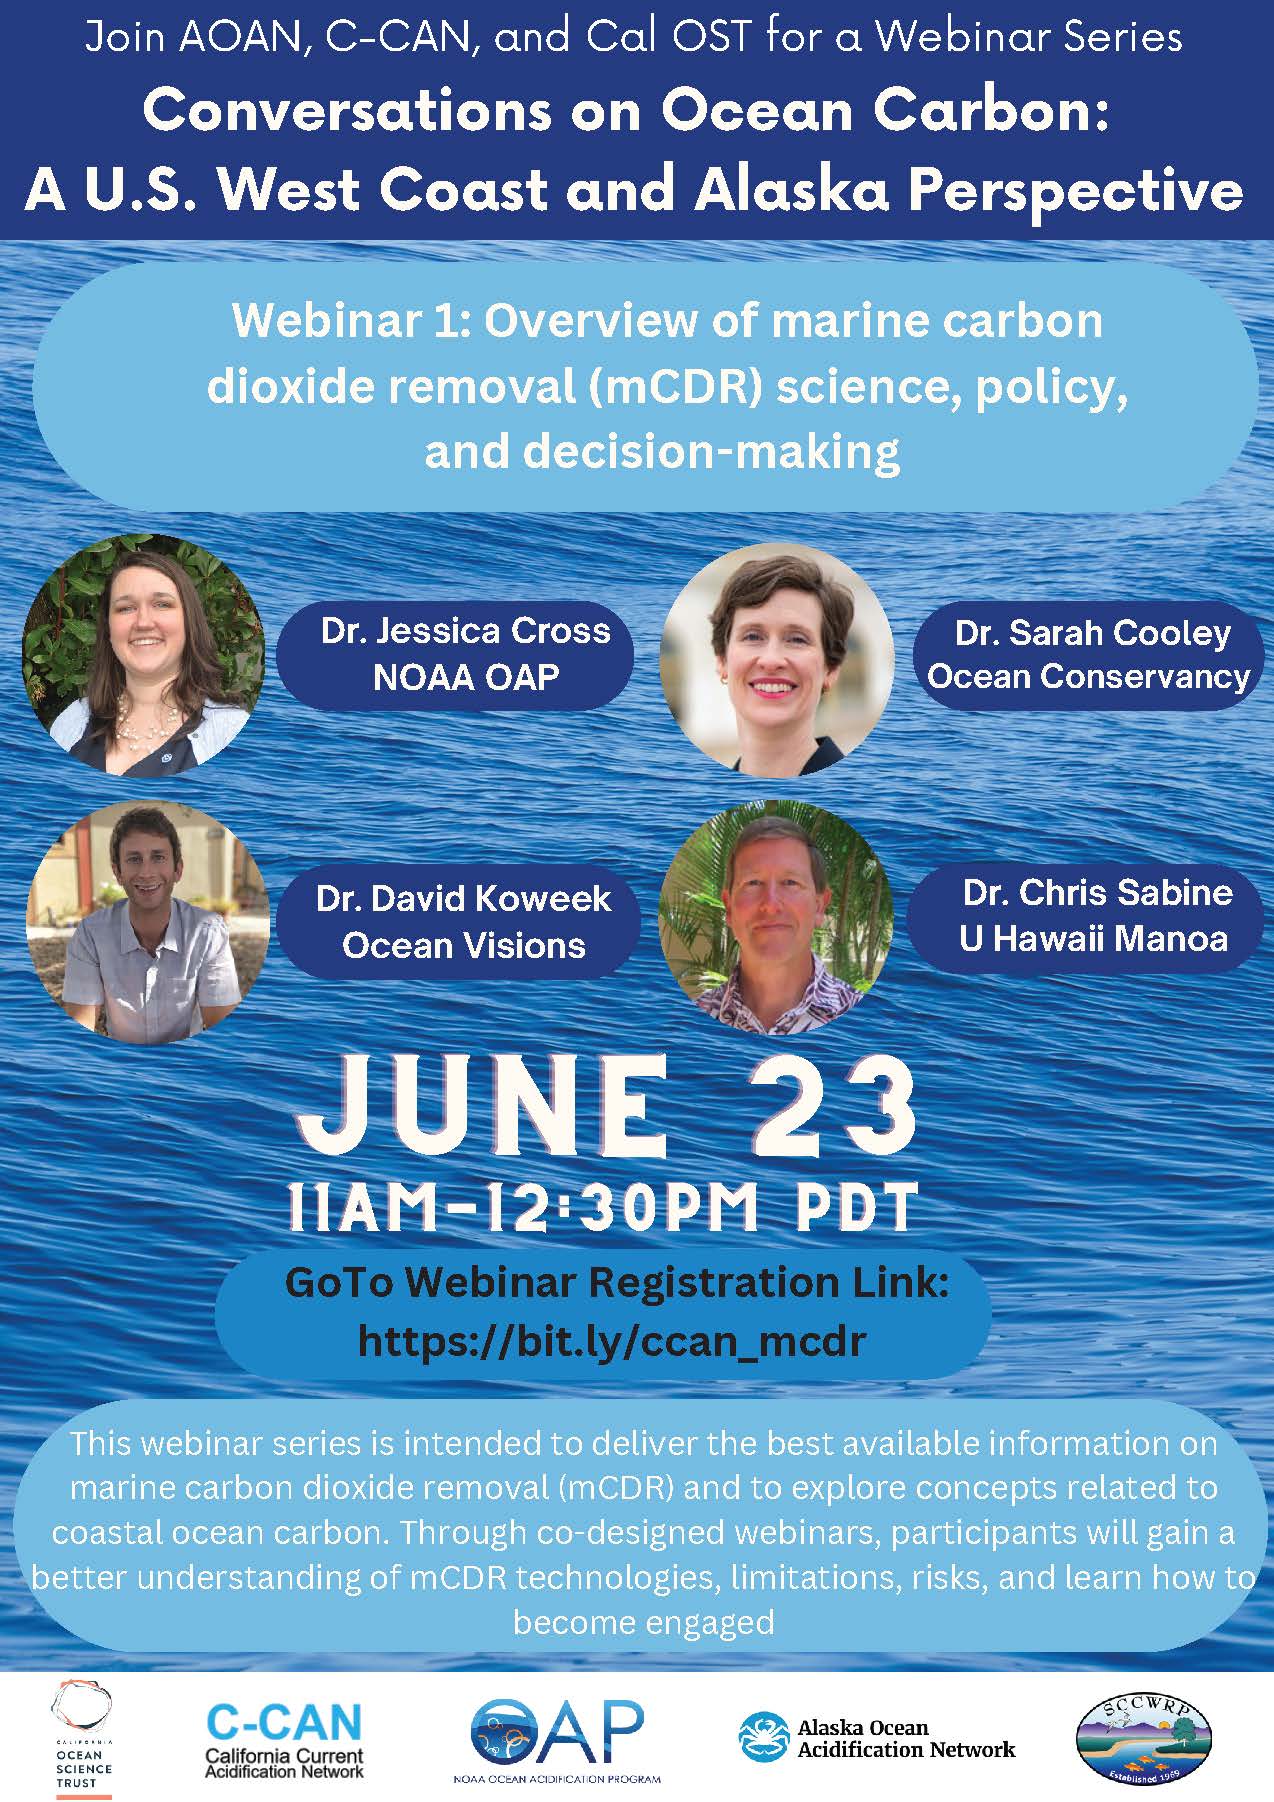 C-CAN Webinar: Overview of Marine Carbon Dioxide Removal (mCDR) Webinar